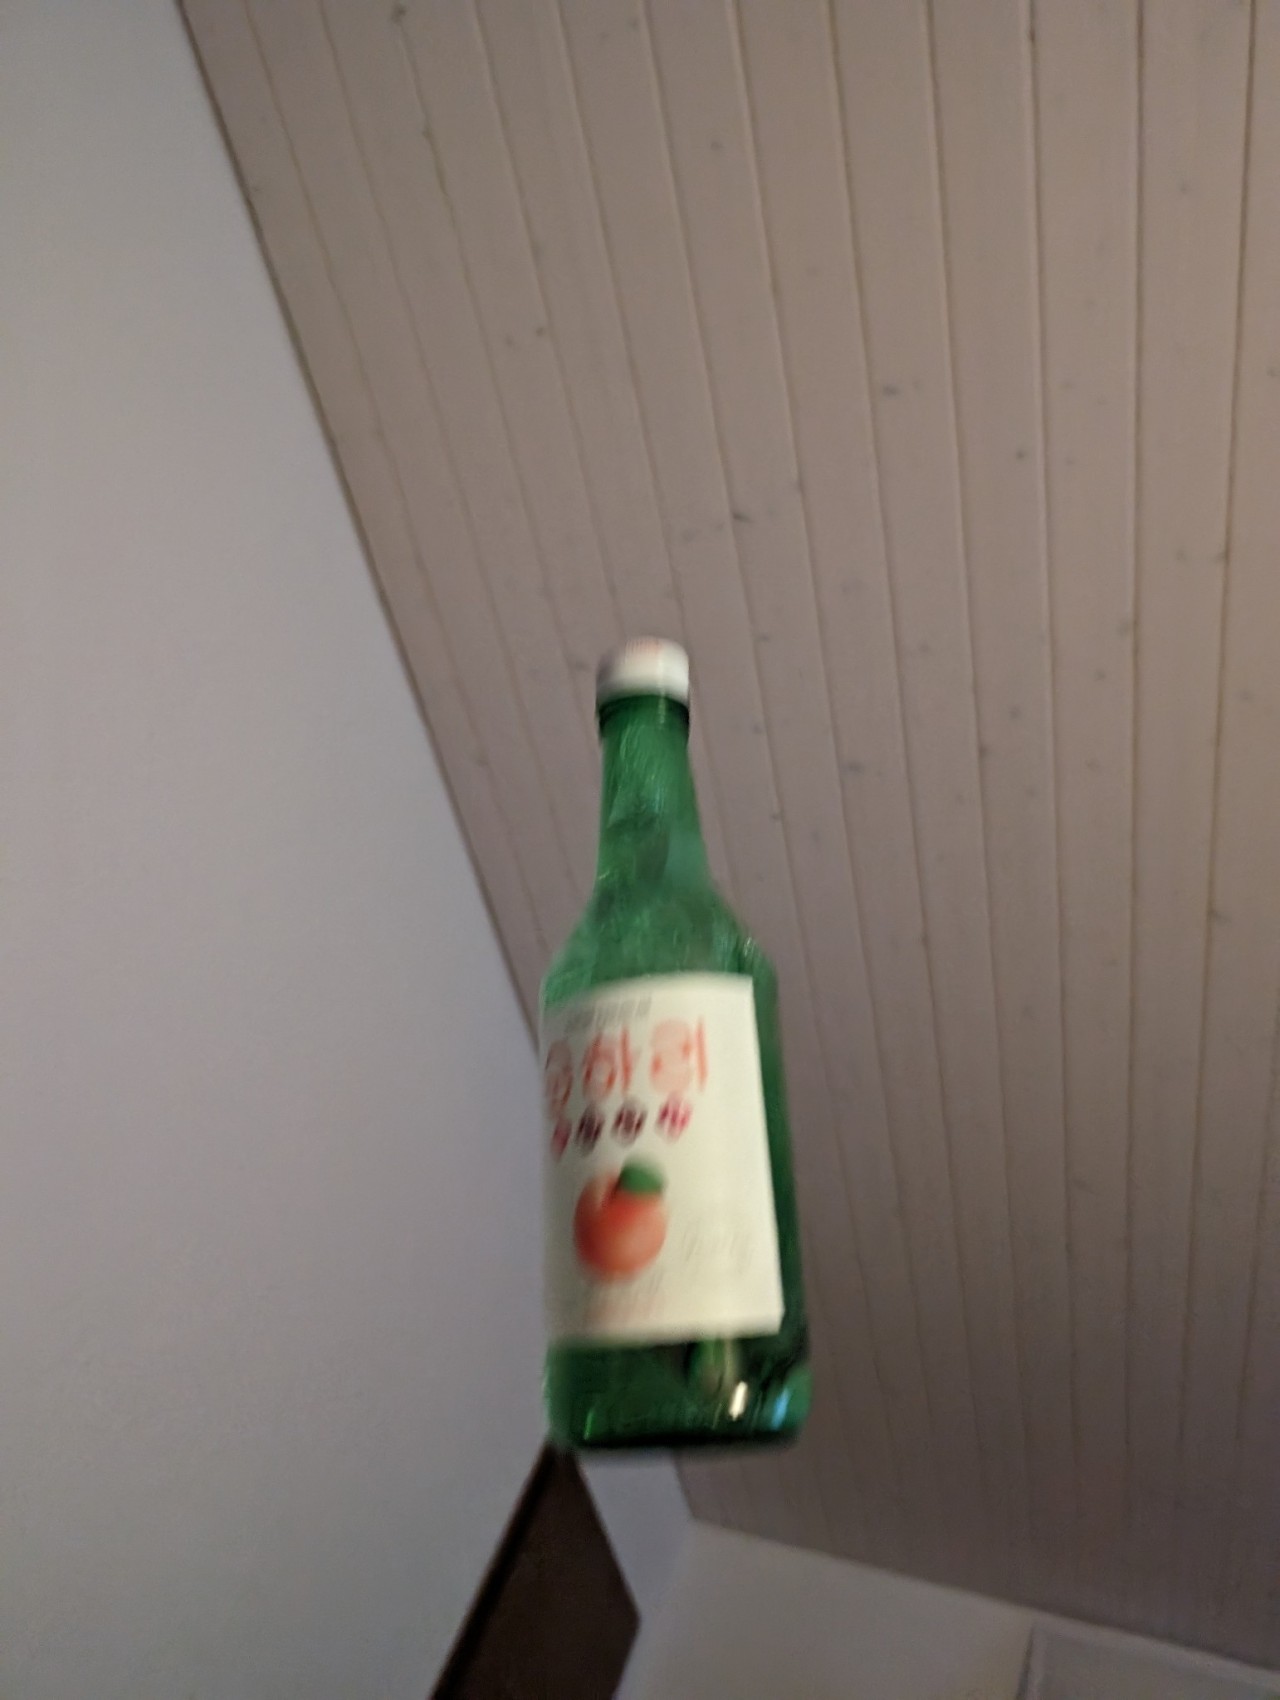 a photo of a bottle of plum soju in mid air